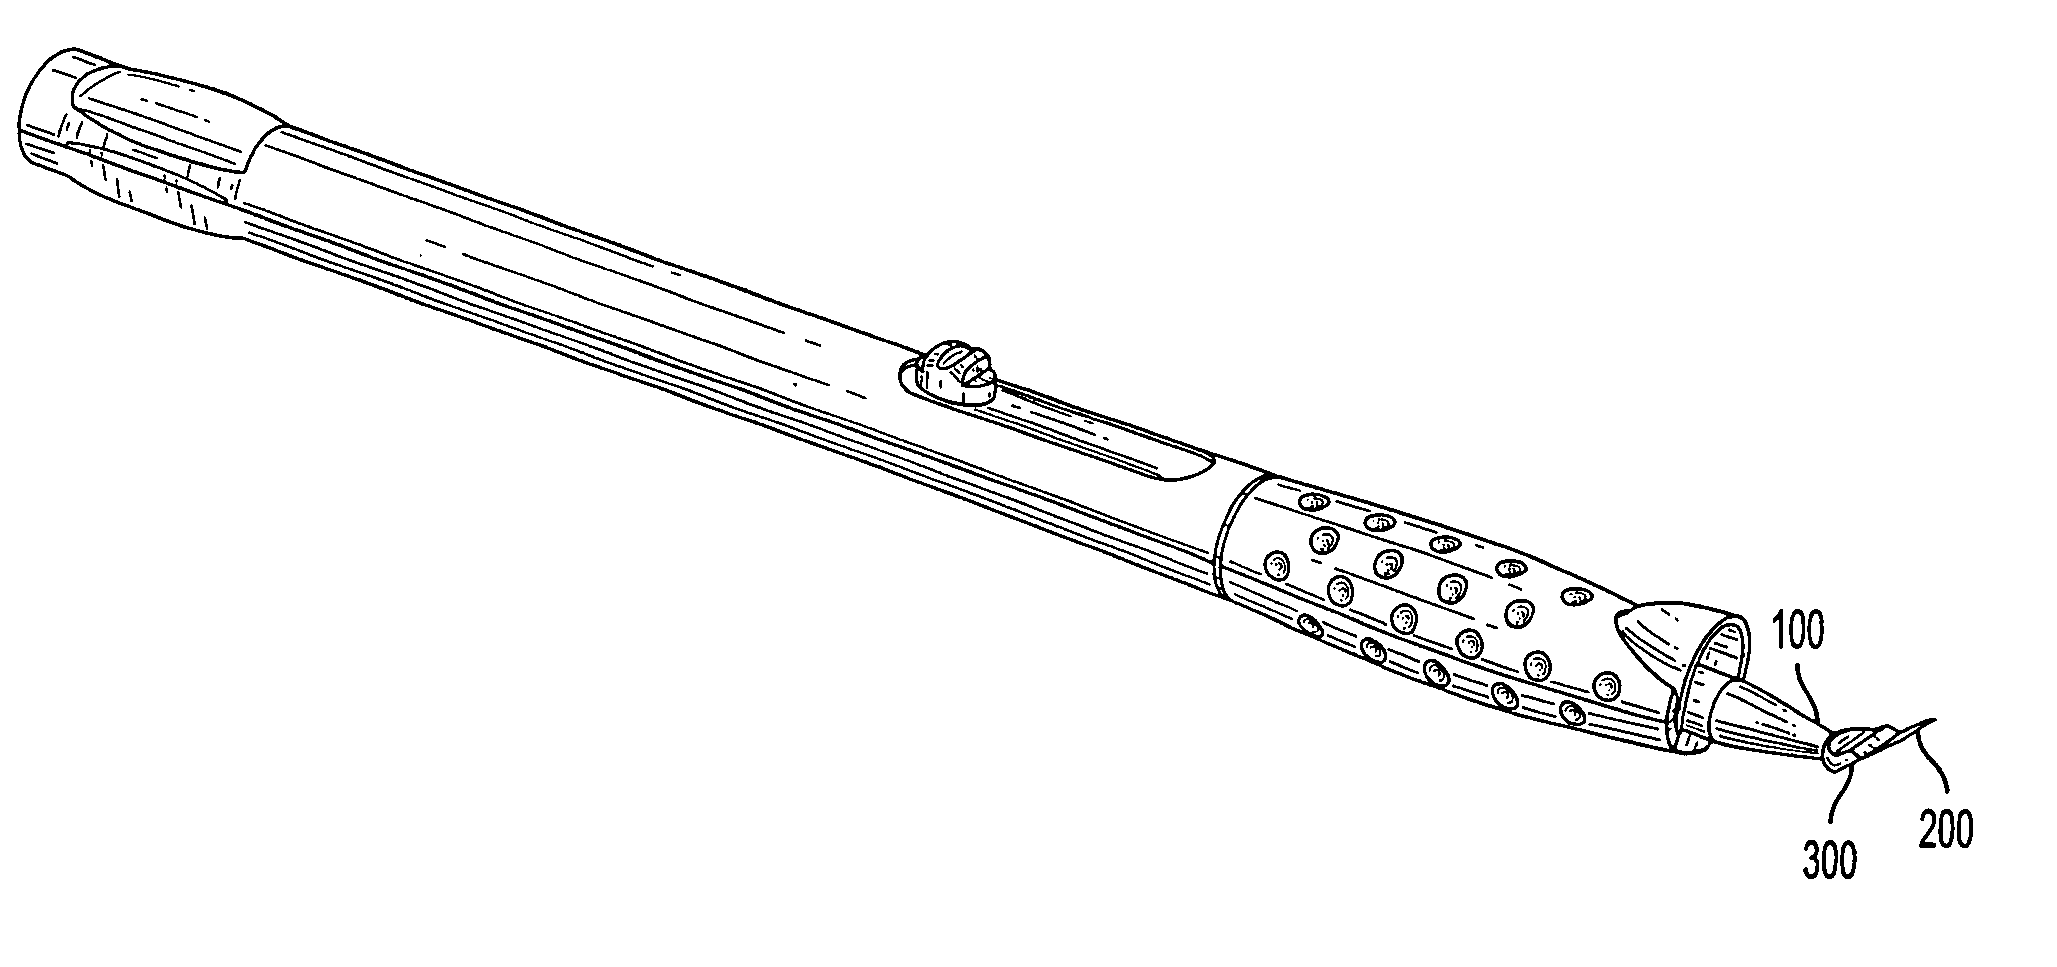 Surgical knife blade attachment and method for using same